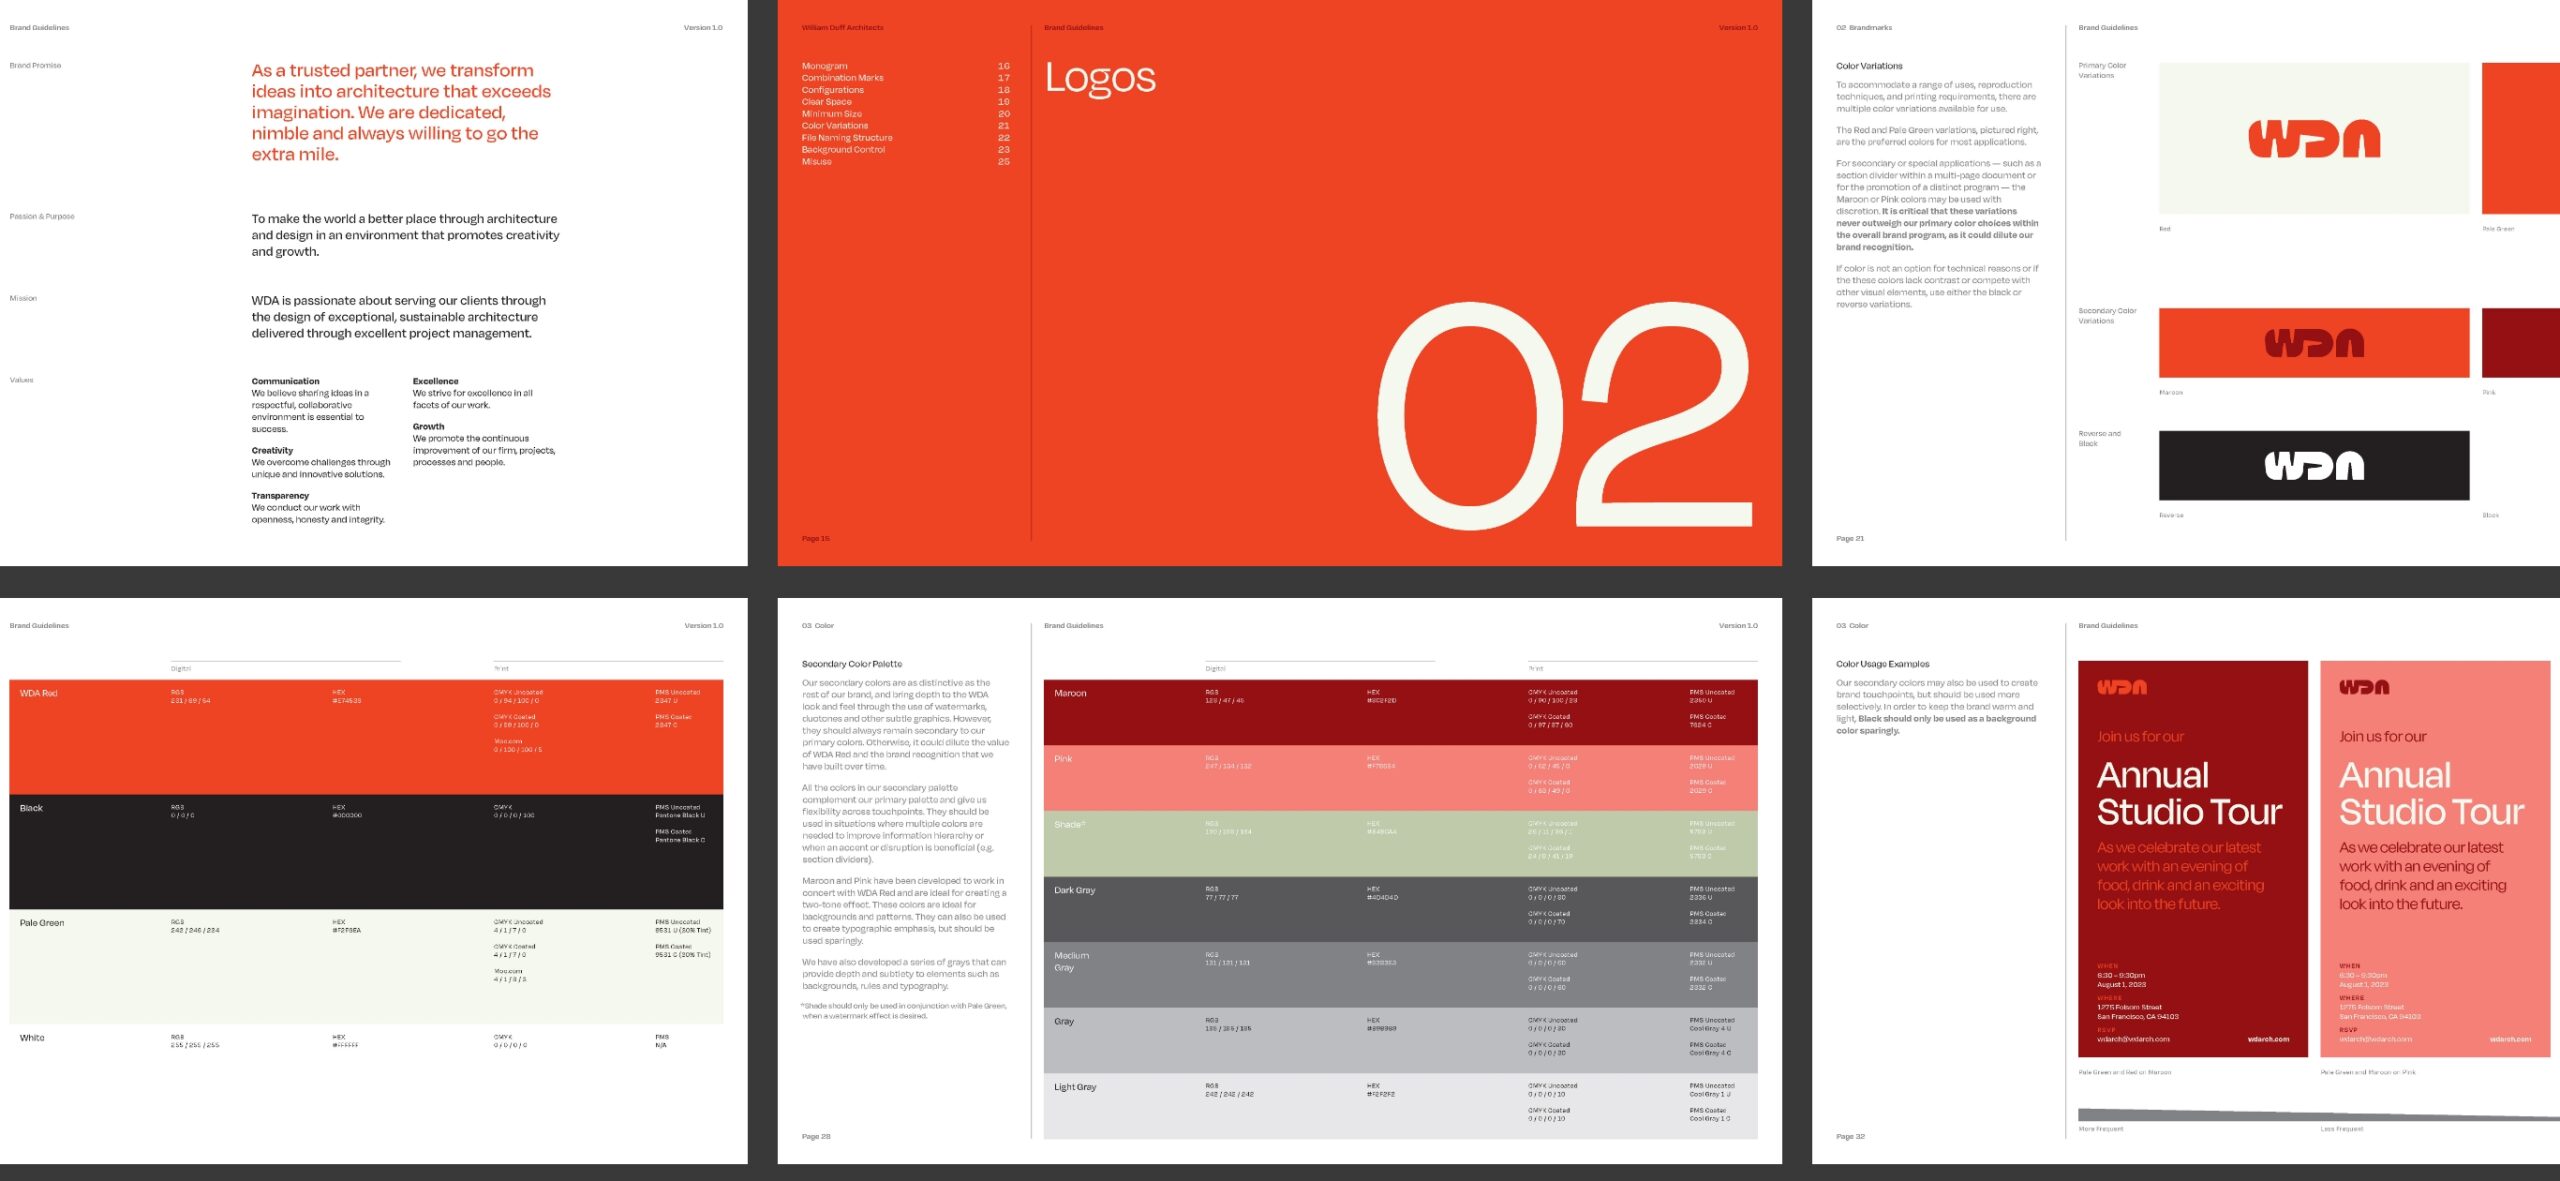 First row showing a grid from pages of the brand guideline